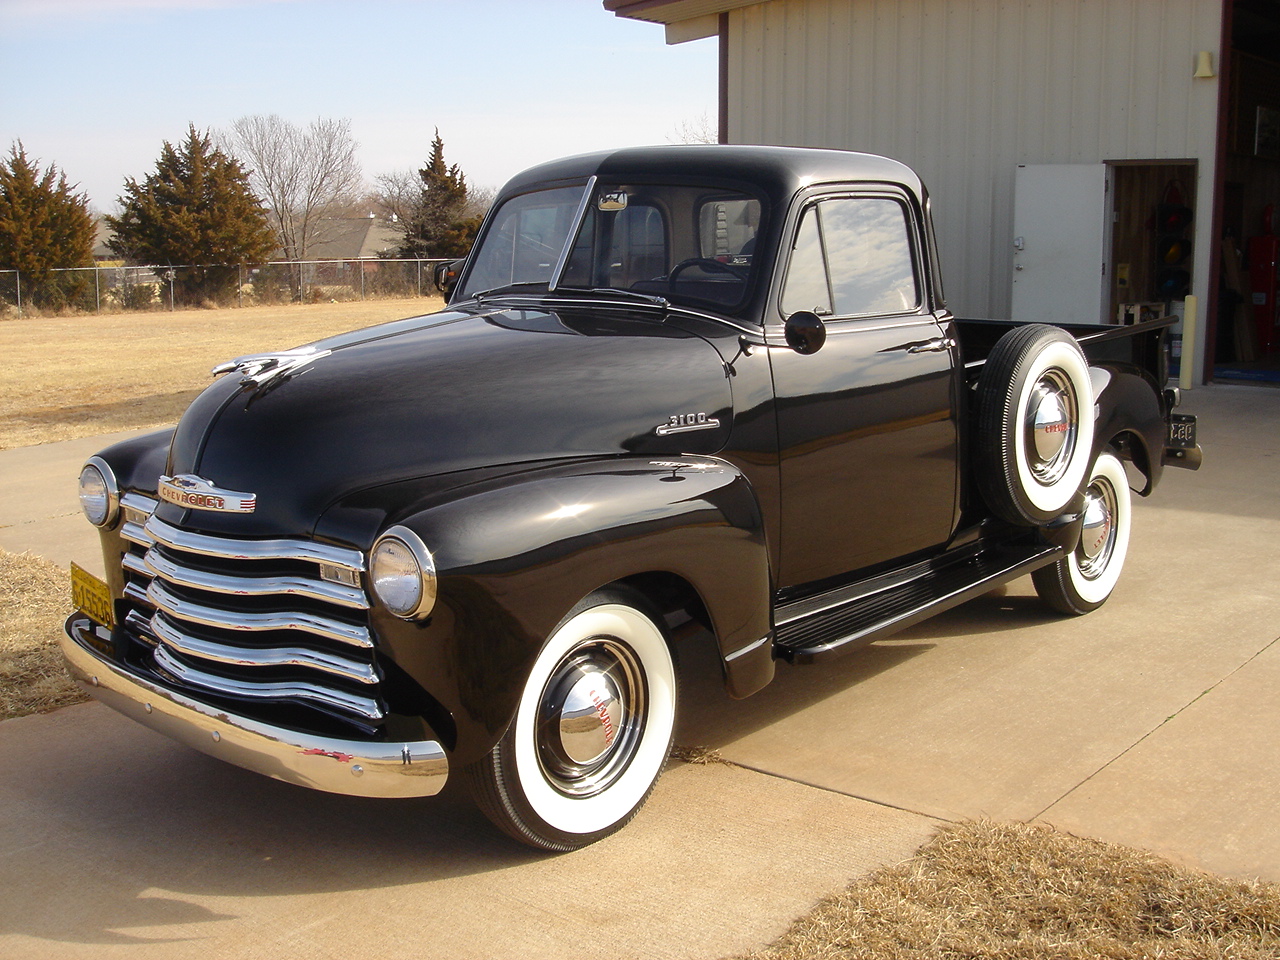 Free download Chevrolet Wallpapers Chevrolet 3100 Pickup 1951